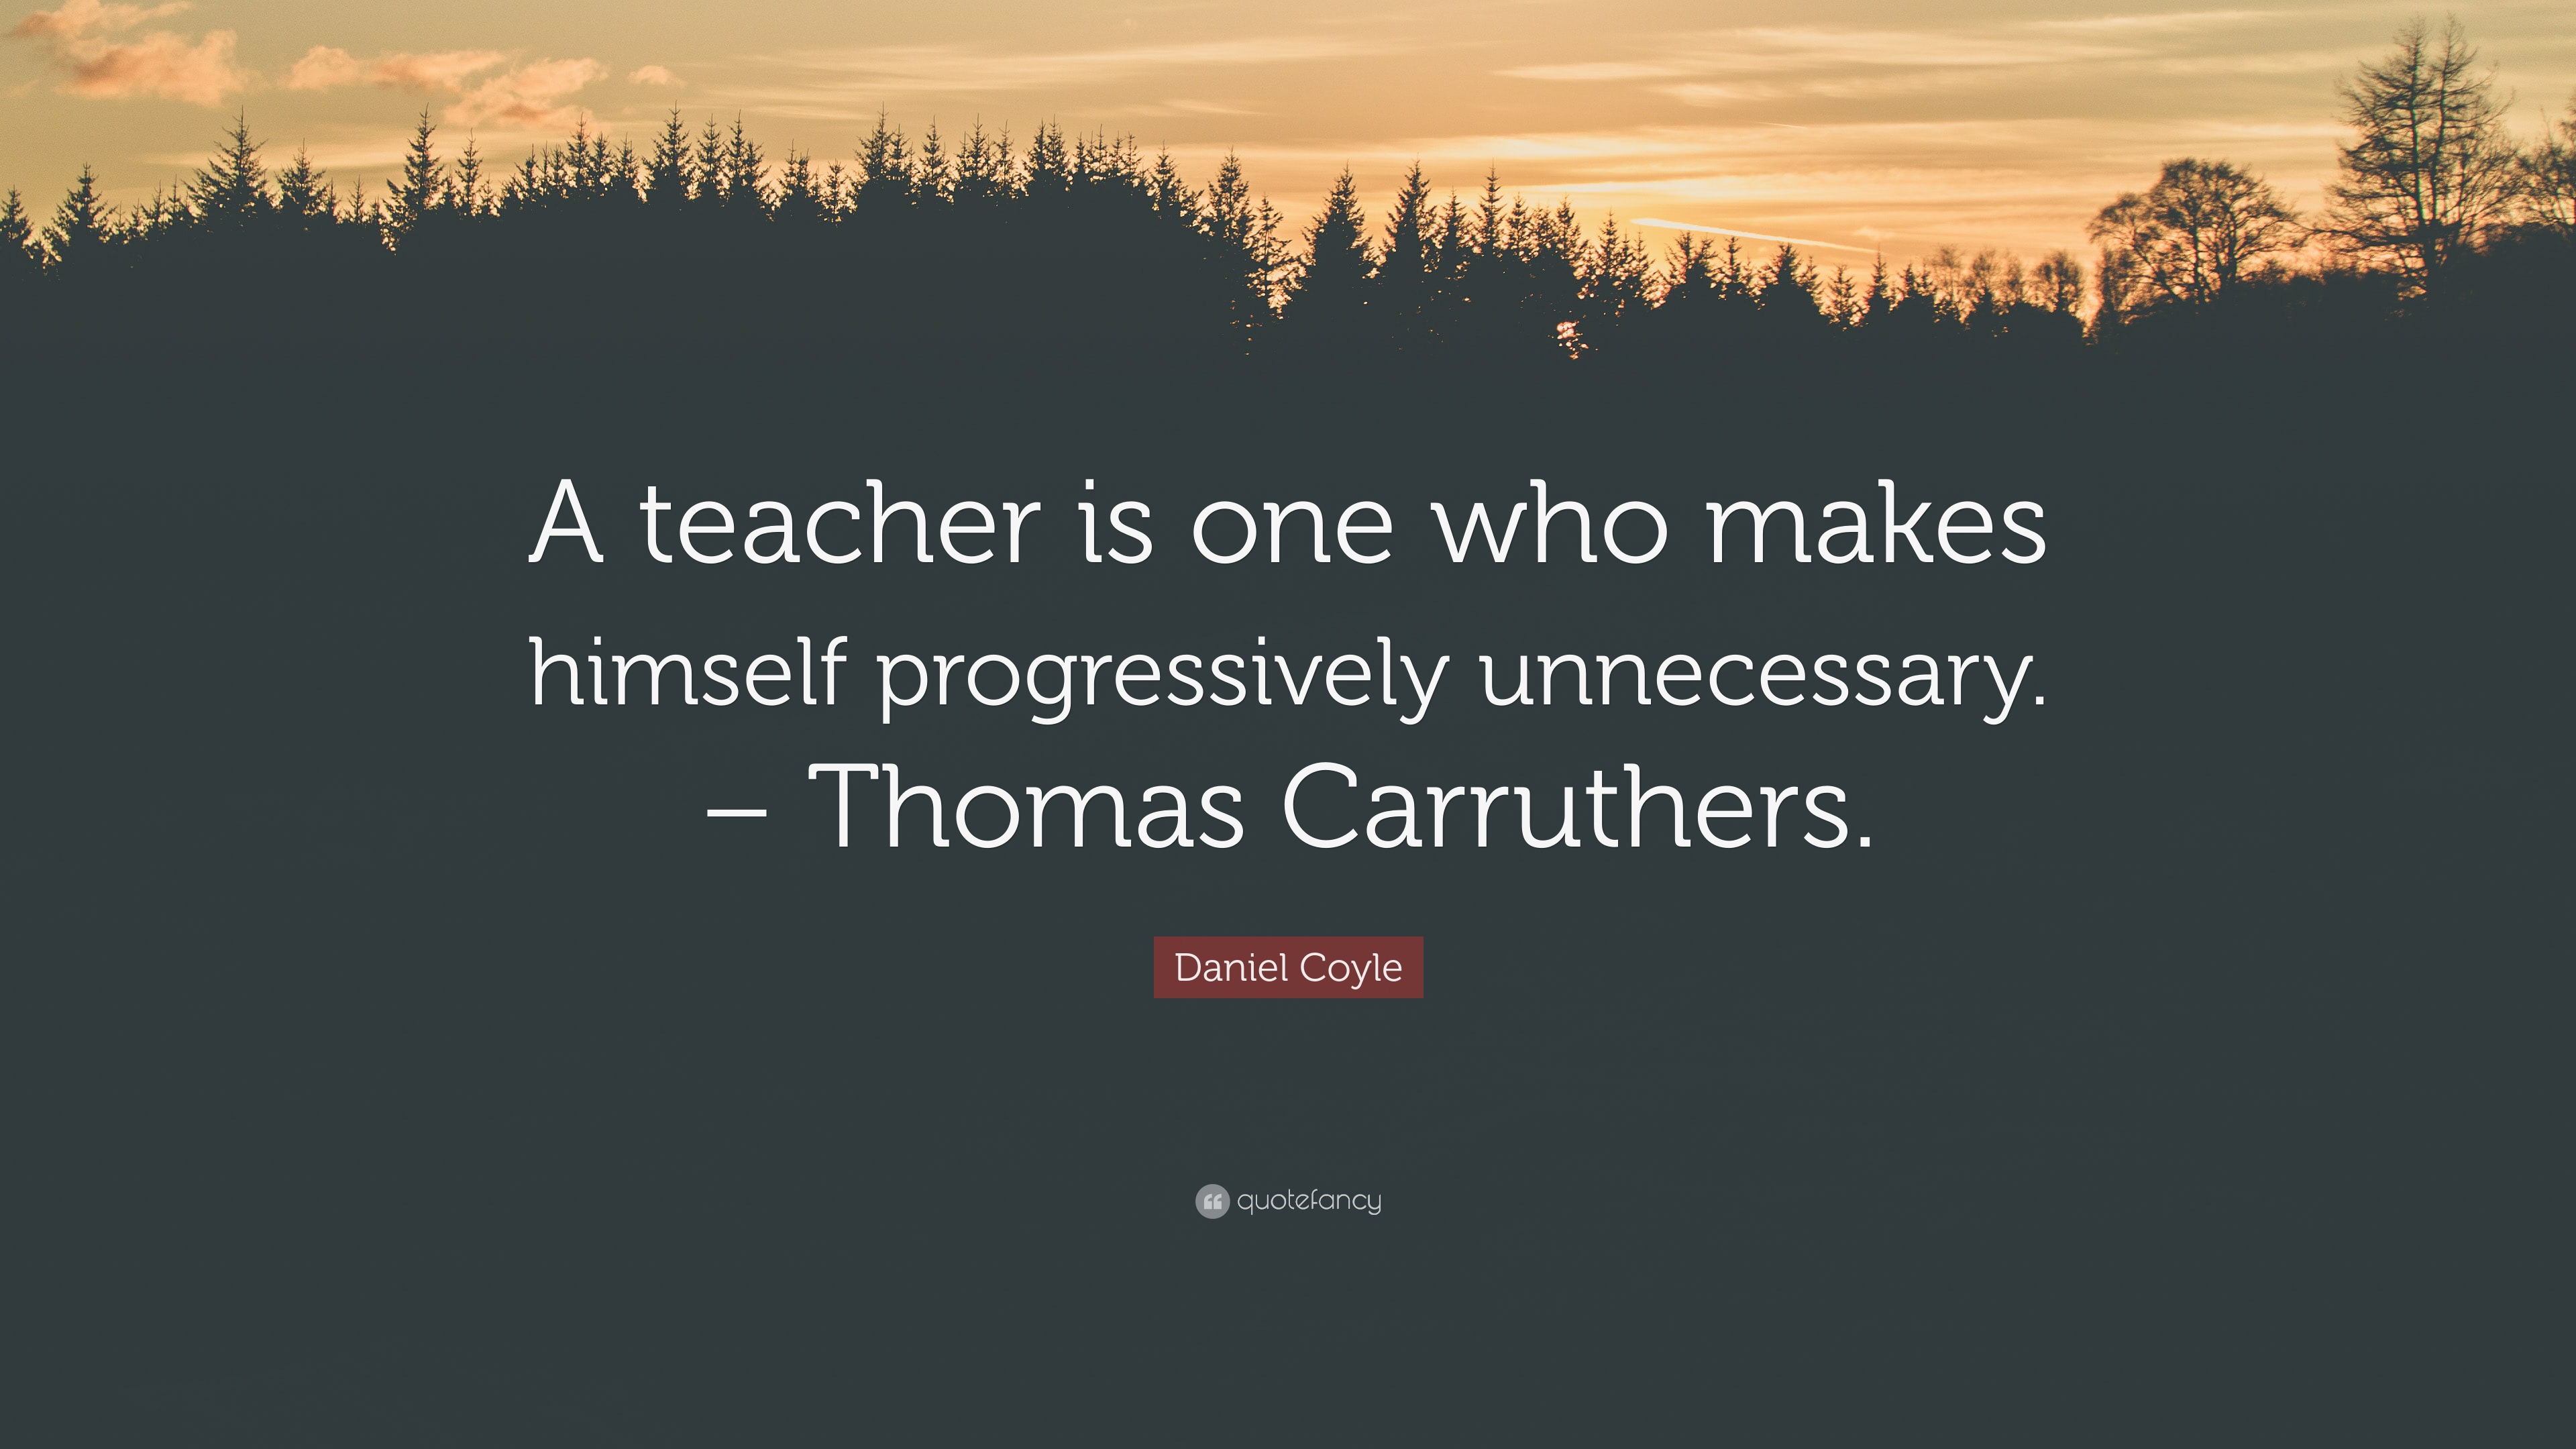 Daniel Coyle Quote: “A teacher is one who makes himself progressively ...